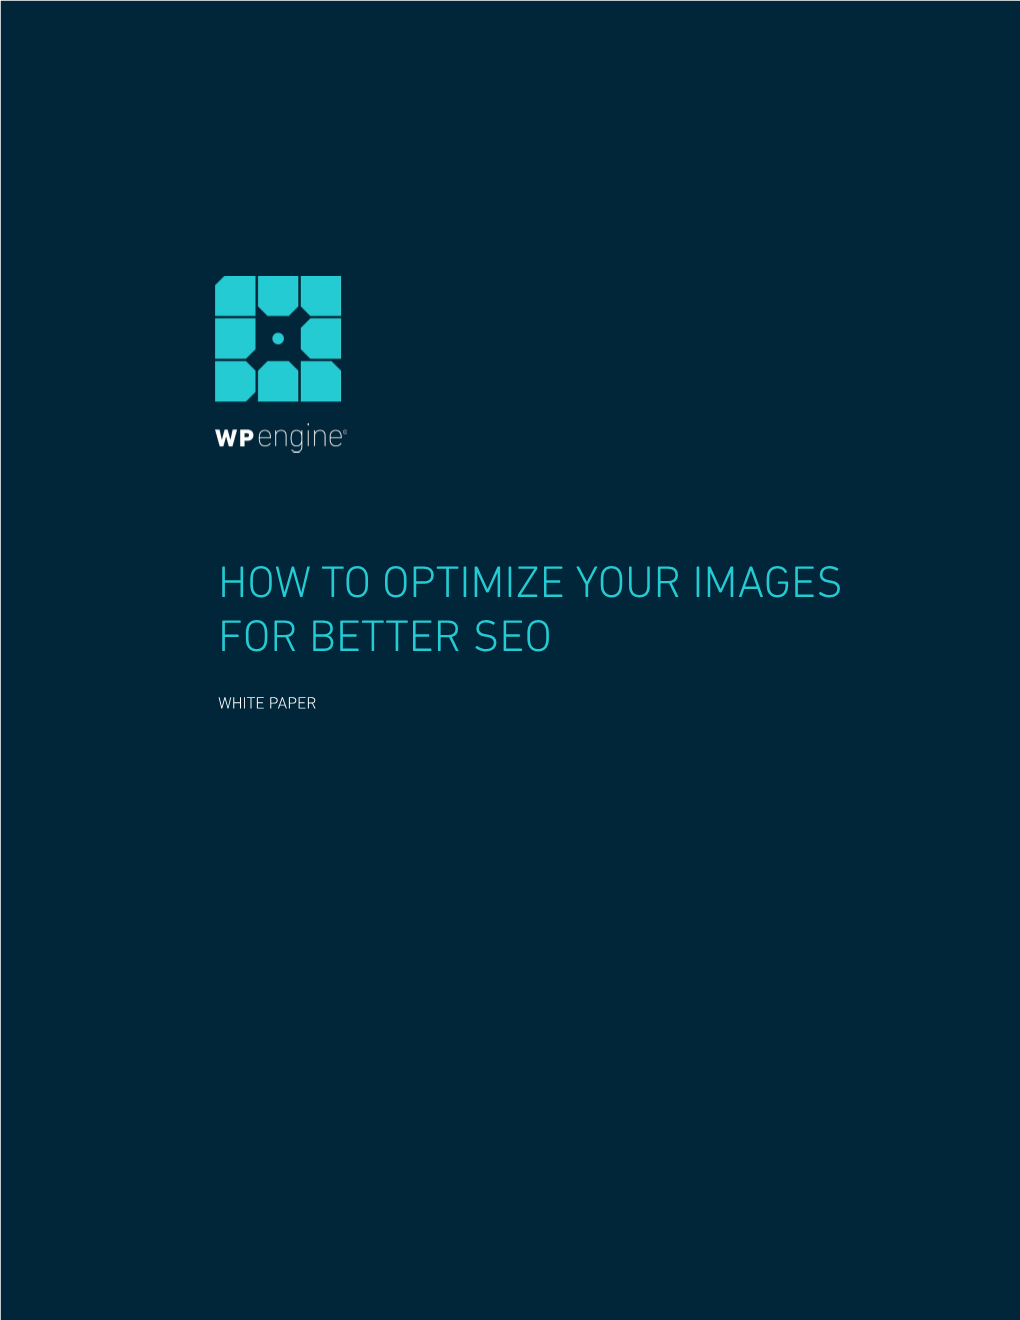 How to Optimize Your Images for Better Seo